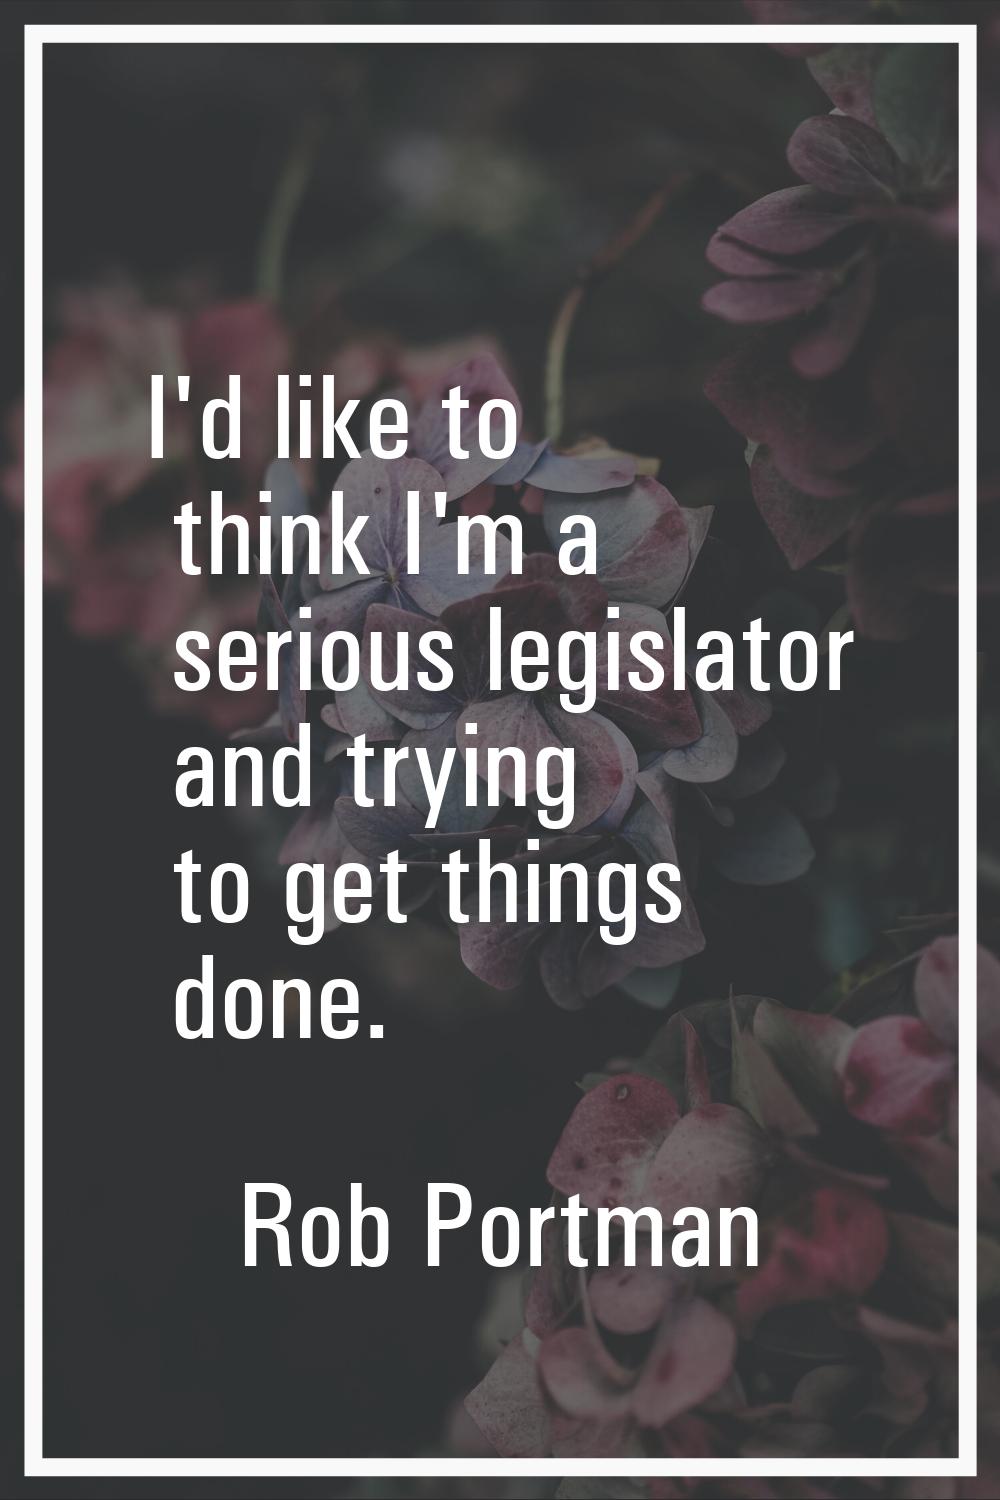 I'd like to think I'm a serious legislator and trying to get things done.